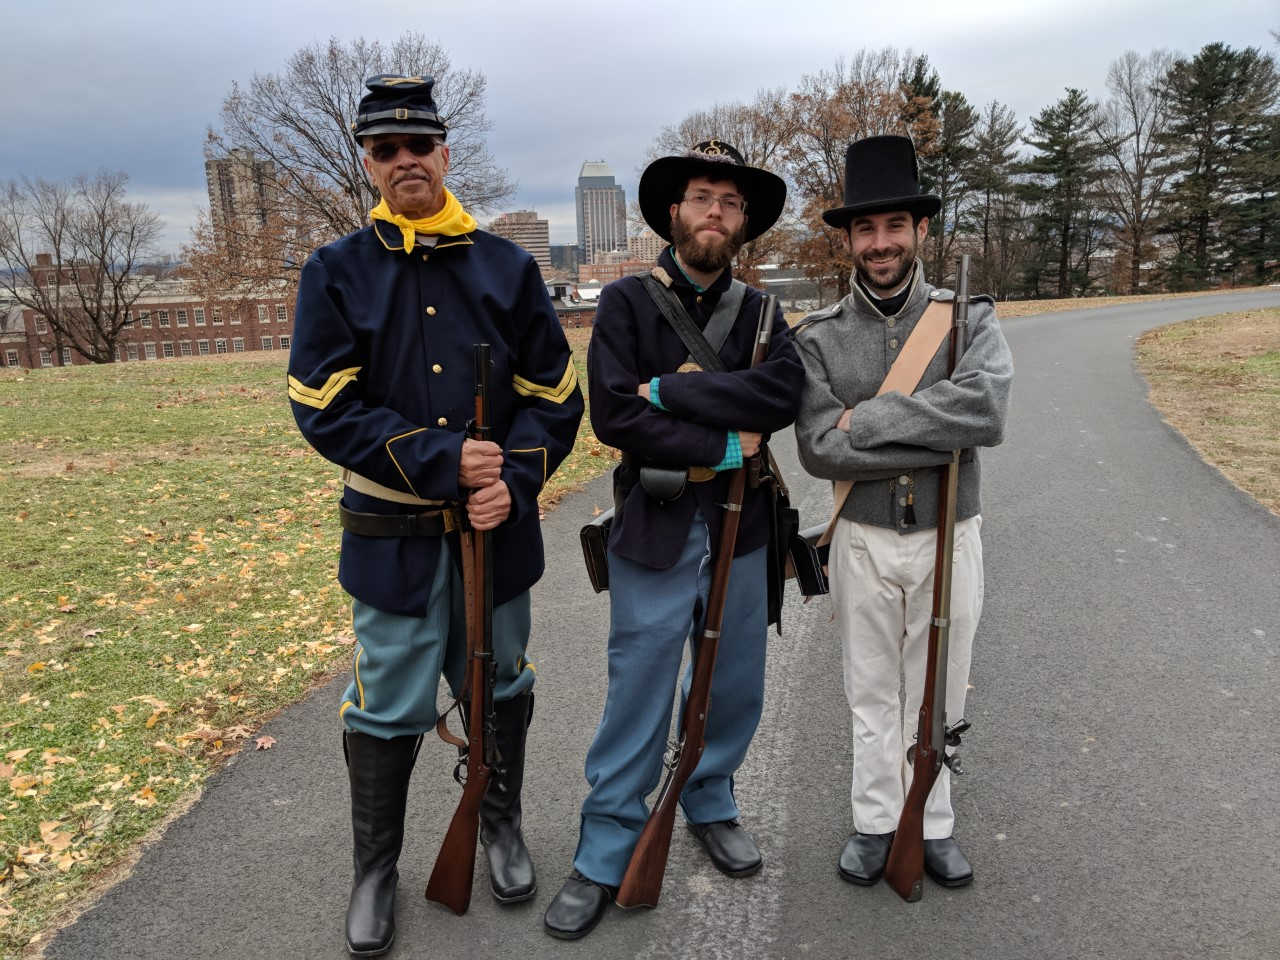 Three men in historic costumes from significant time periods in firearm development. One is dressed as a Buffalo Soldier, one as a Union Civil war soldier and one as an 18th century person